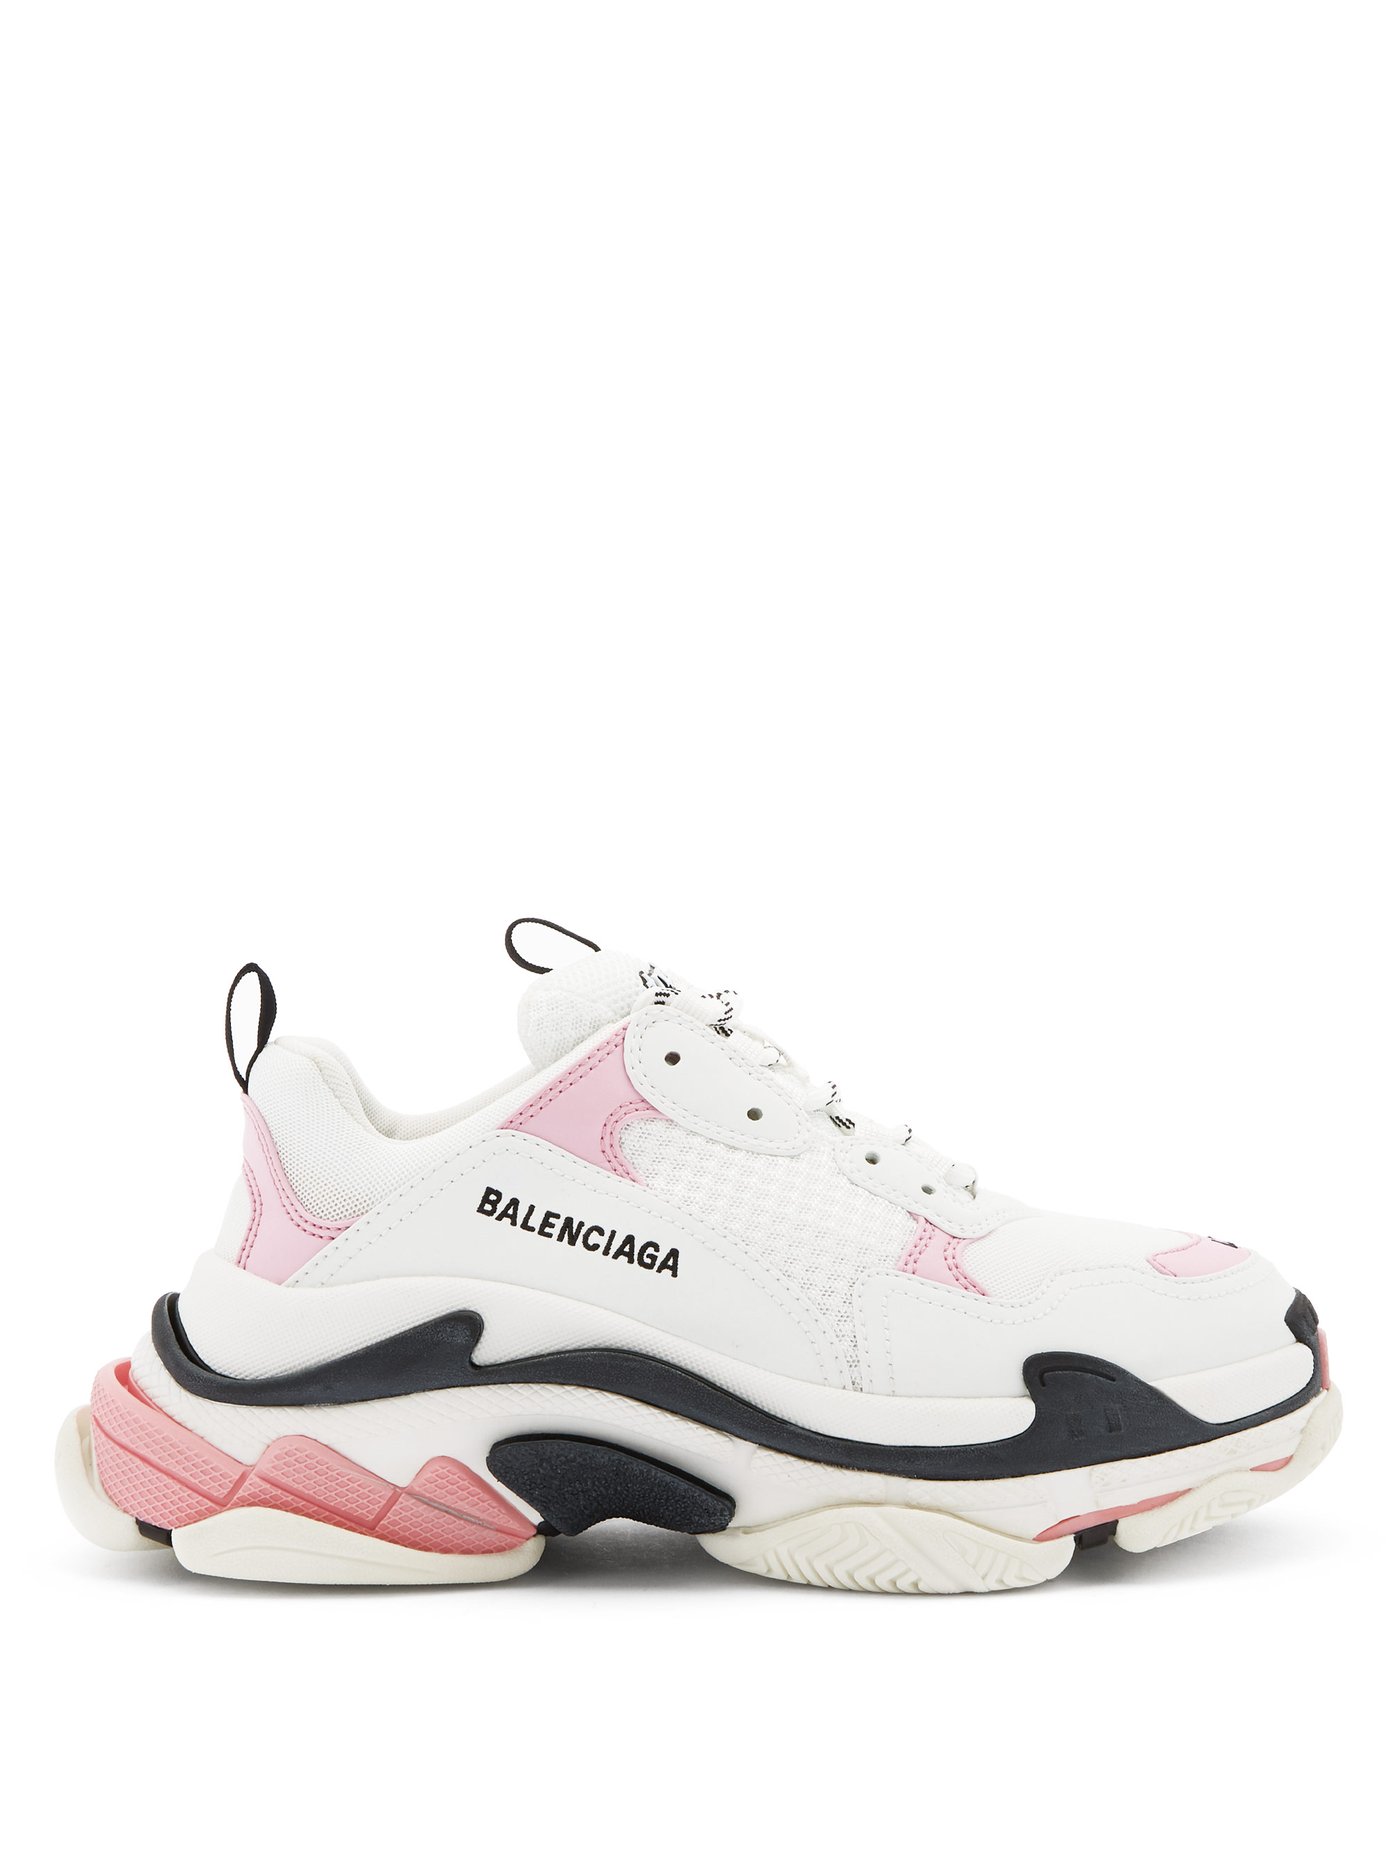 Balenciaga Triple S Size 34 Online Sale, UP TO 70% OFF